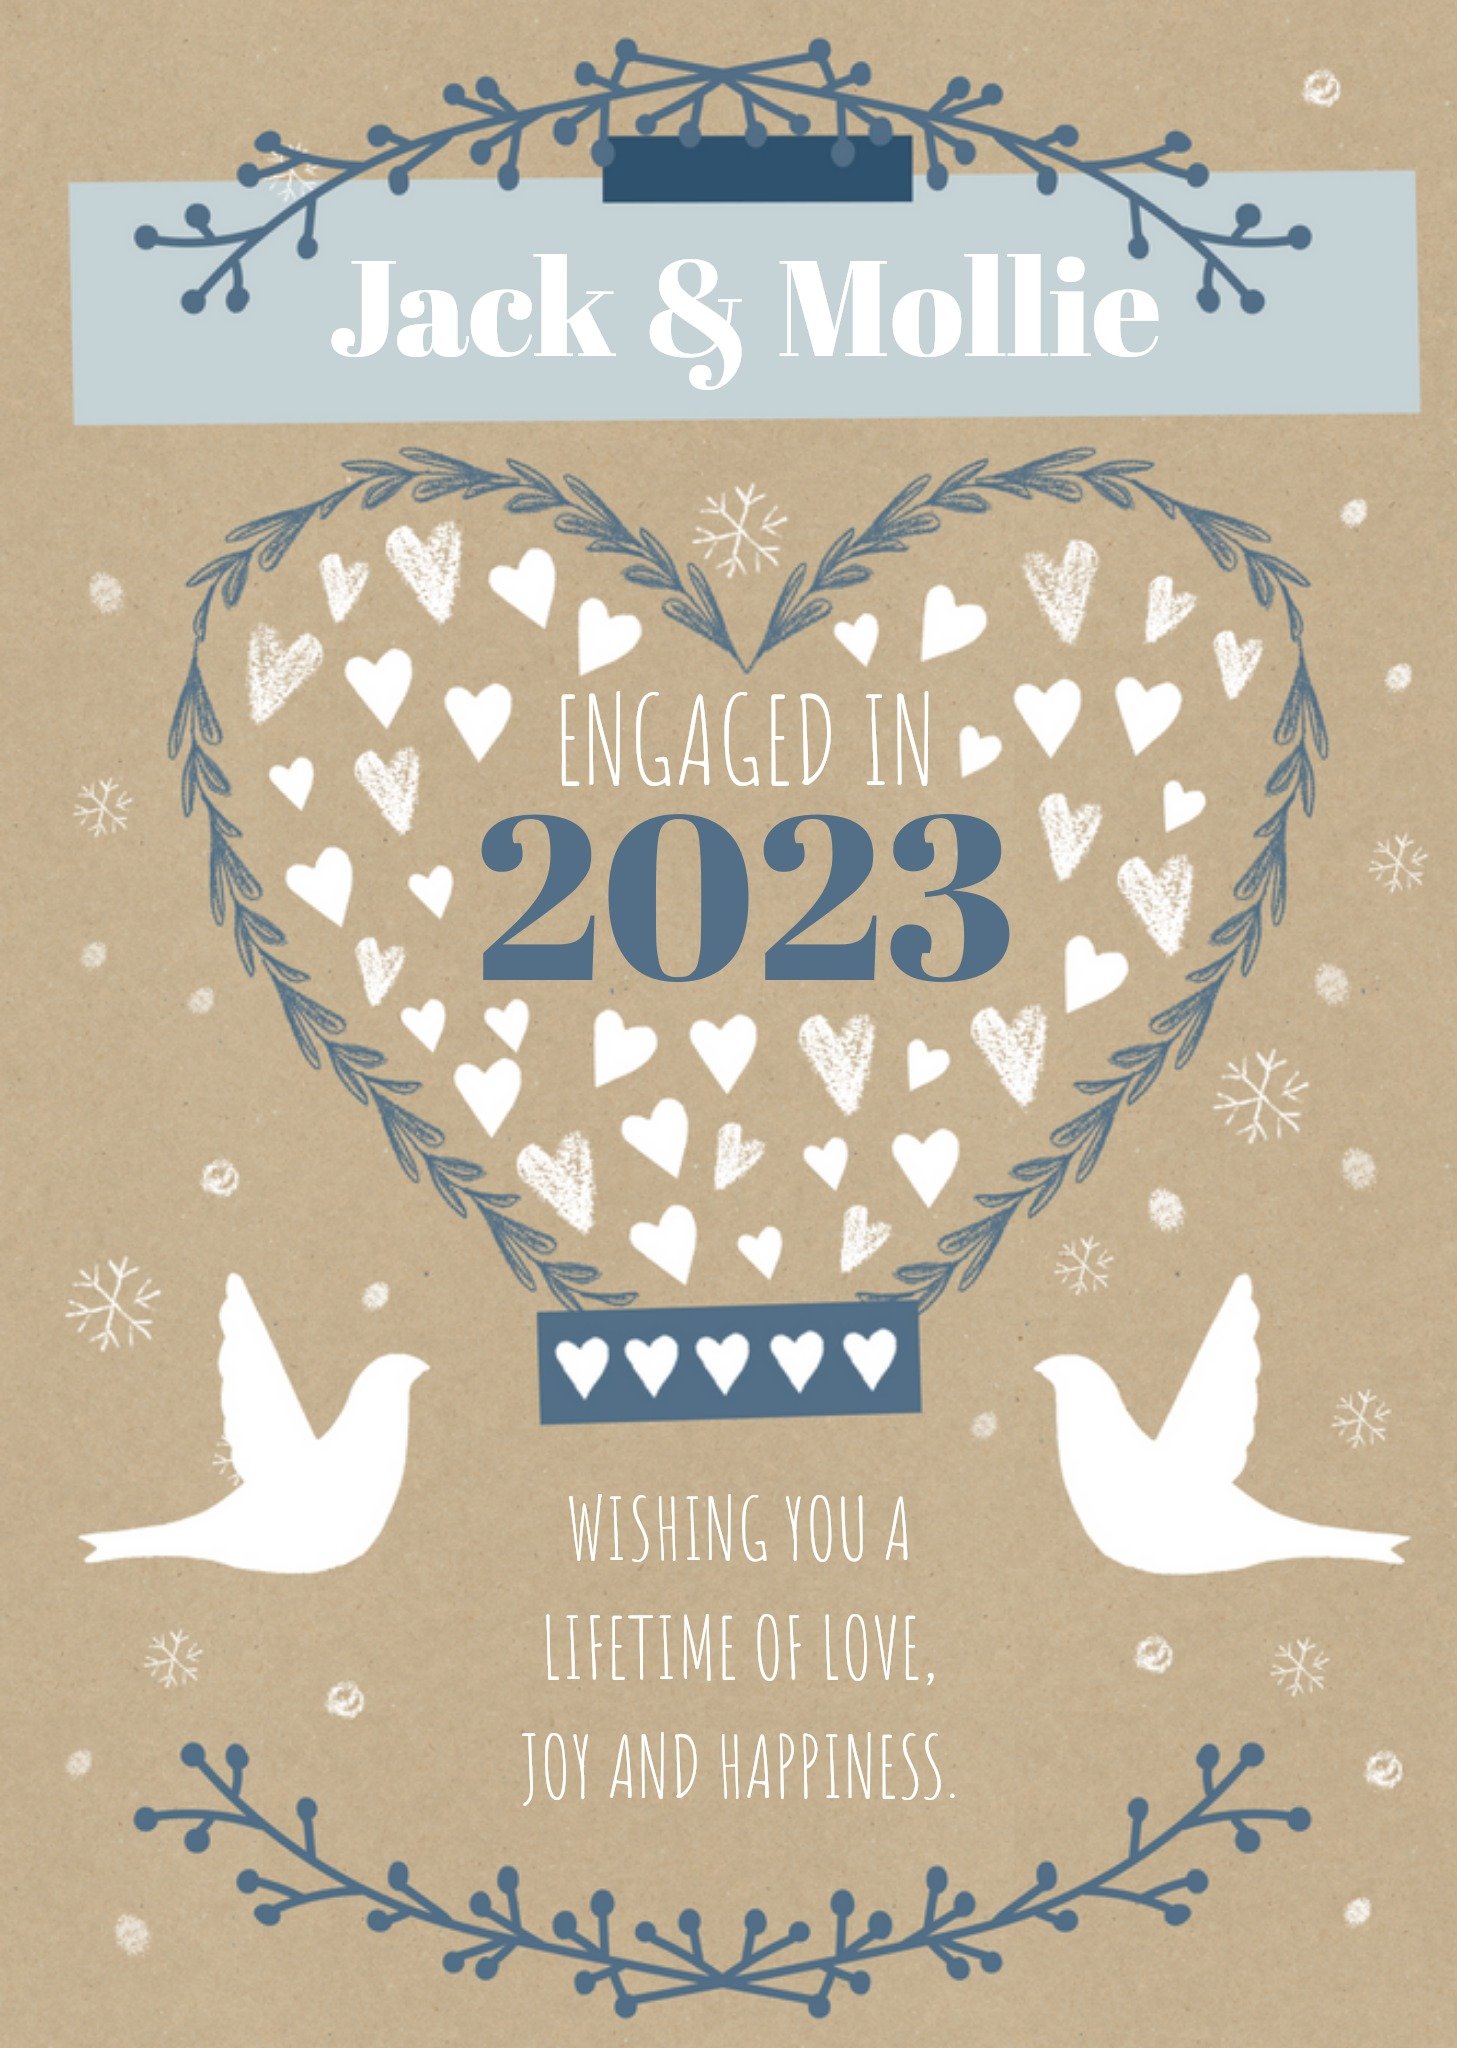 Moonpig Loving Lifetime Of Love Joy And Happiness Engagement Greetings Card, Large